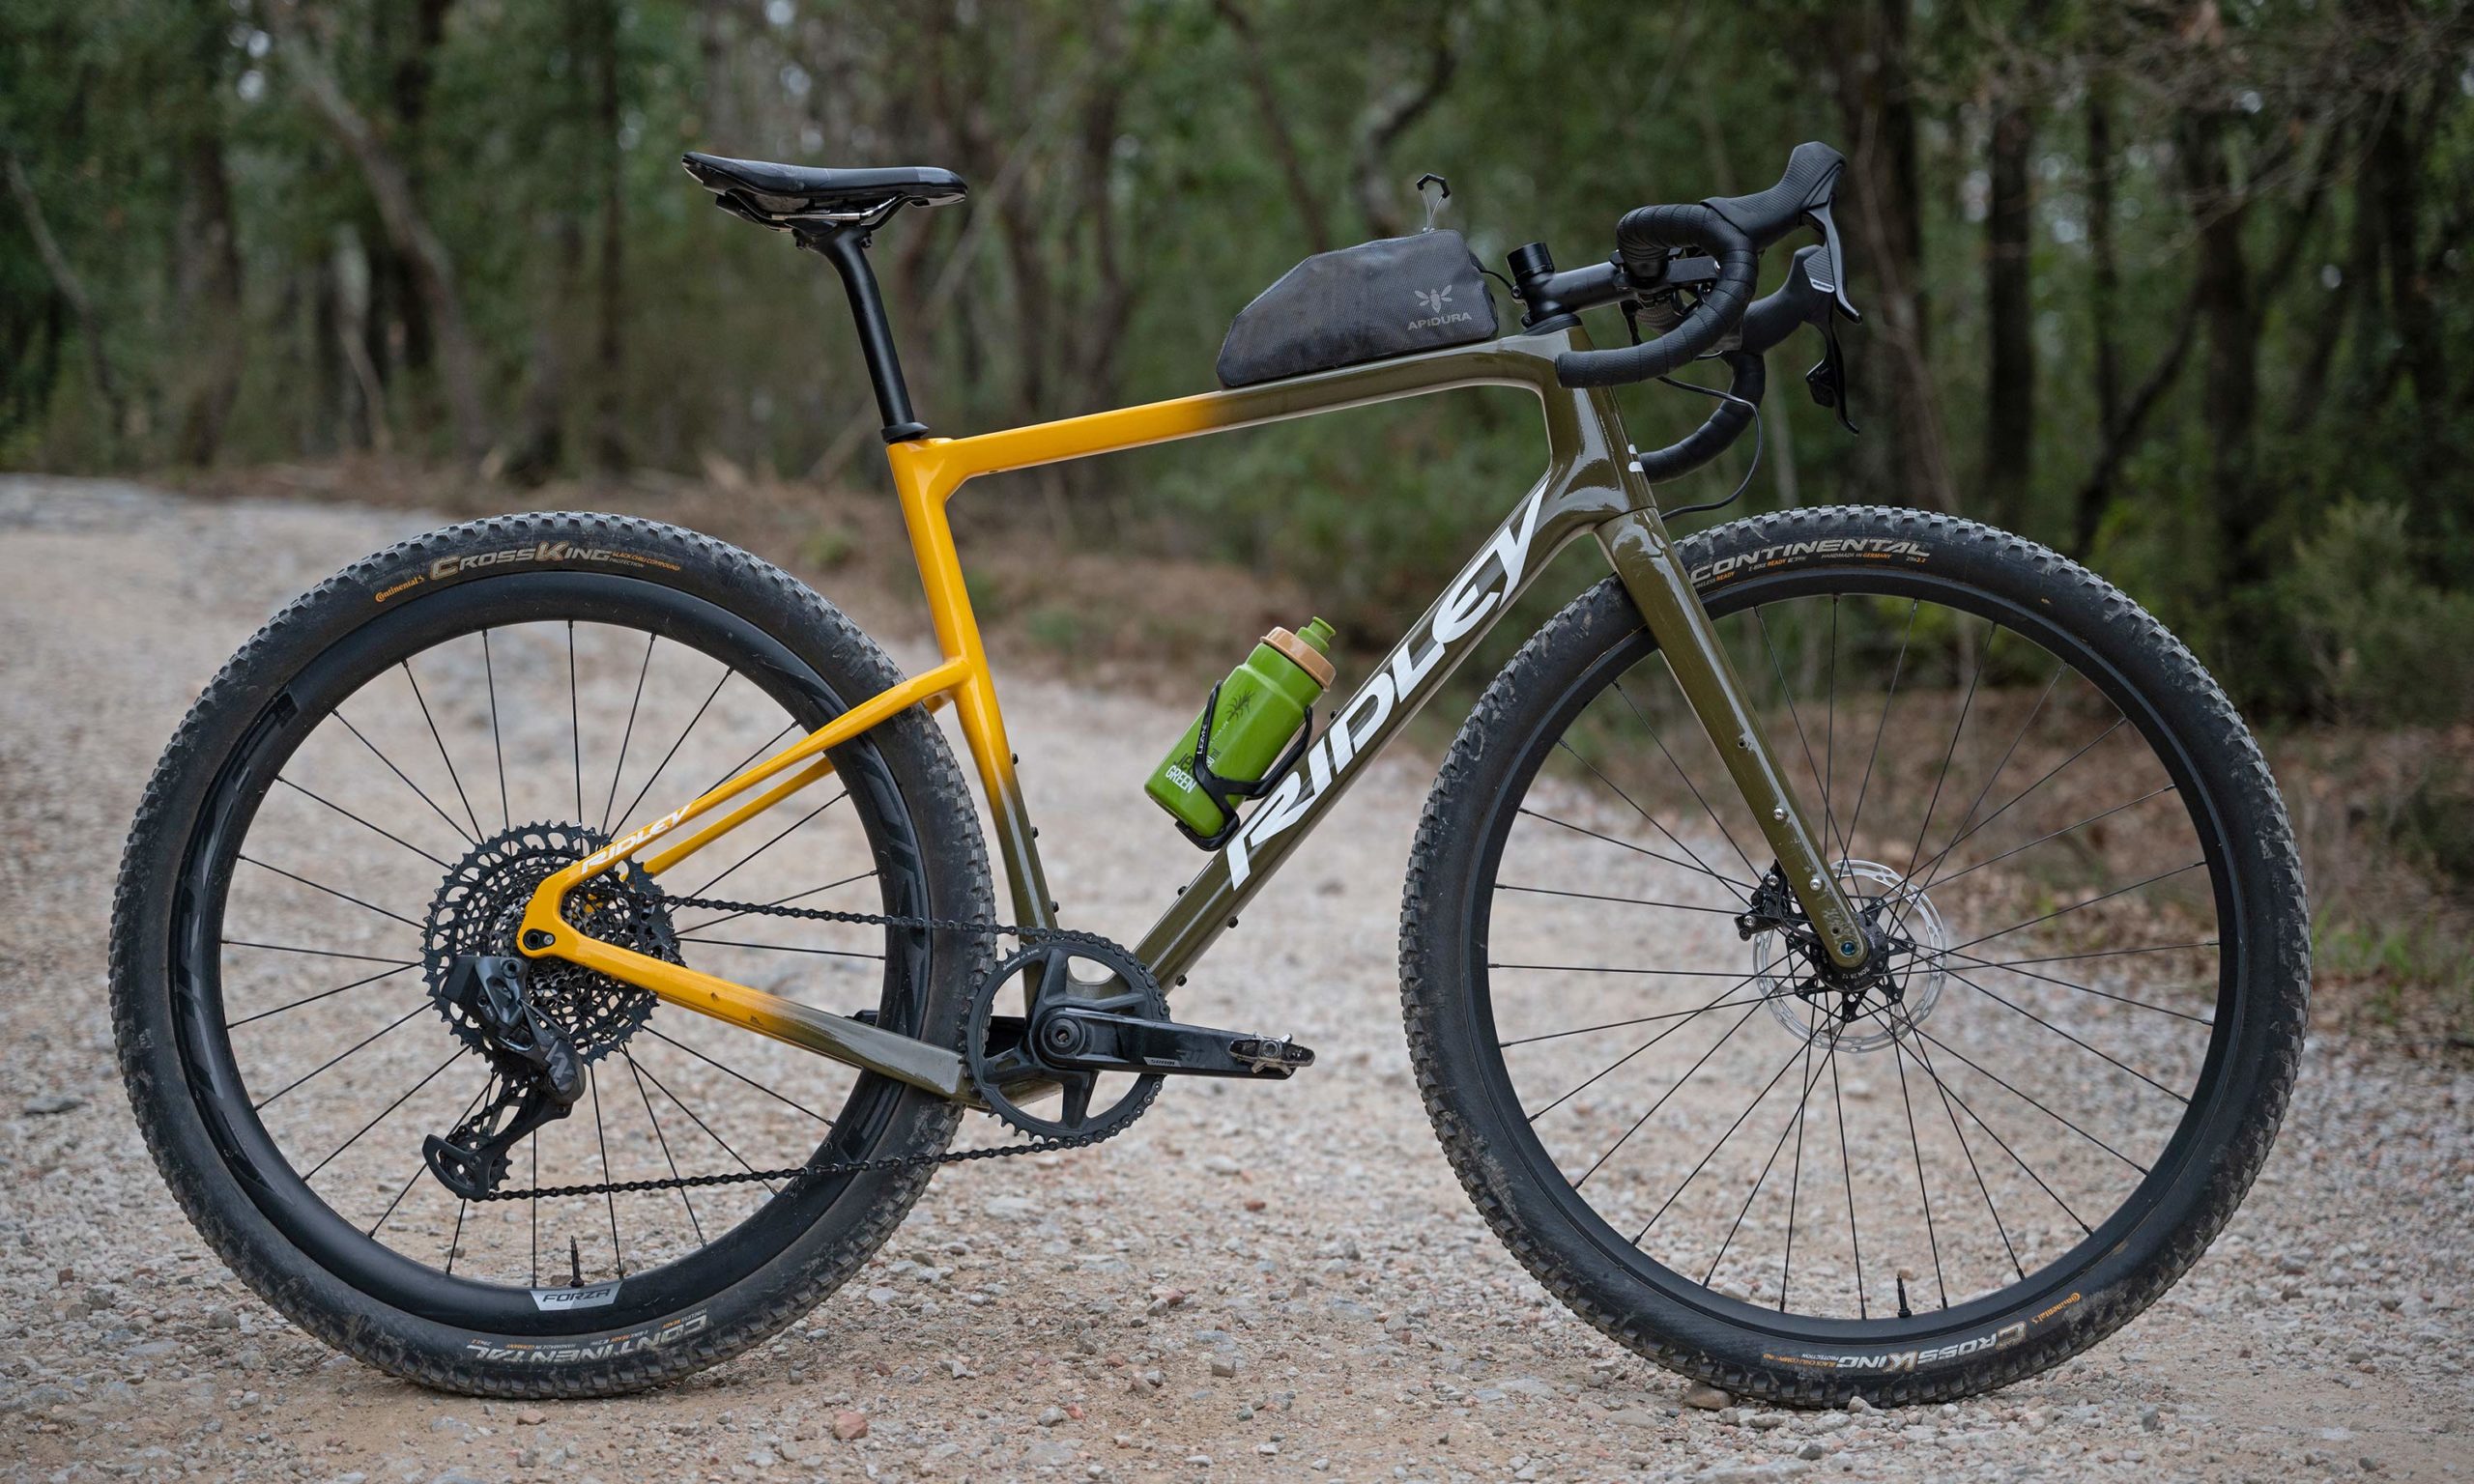 Ridley Kanzo Adventure carbon gravel bikepacking bike, photo by Mirror Media BikeConnectionAgency, dynamo complete